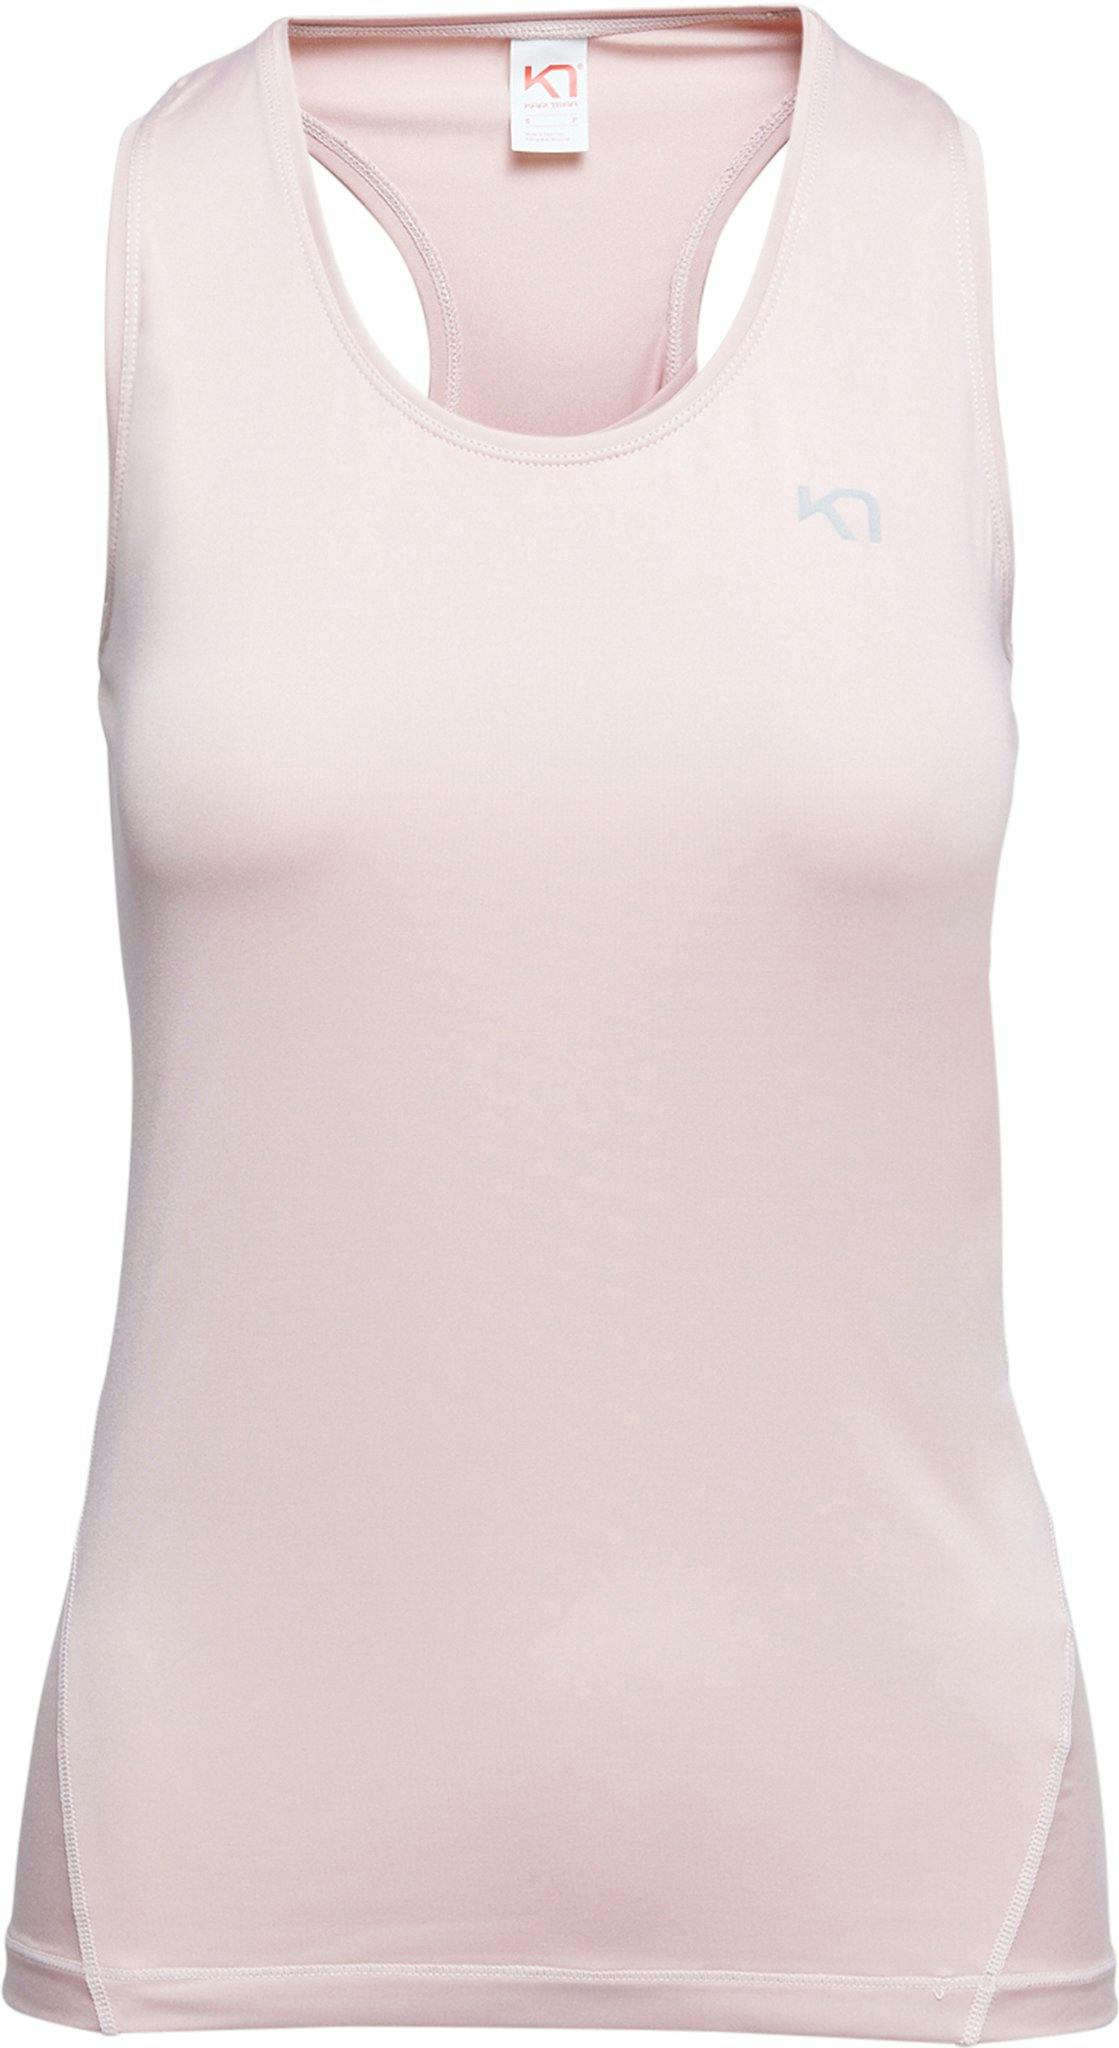 Product image for Nora 2.0 Tank Top - Women's